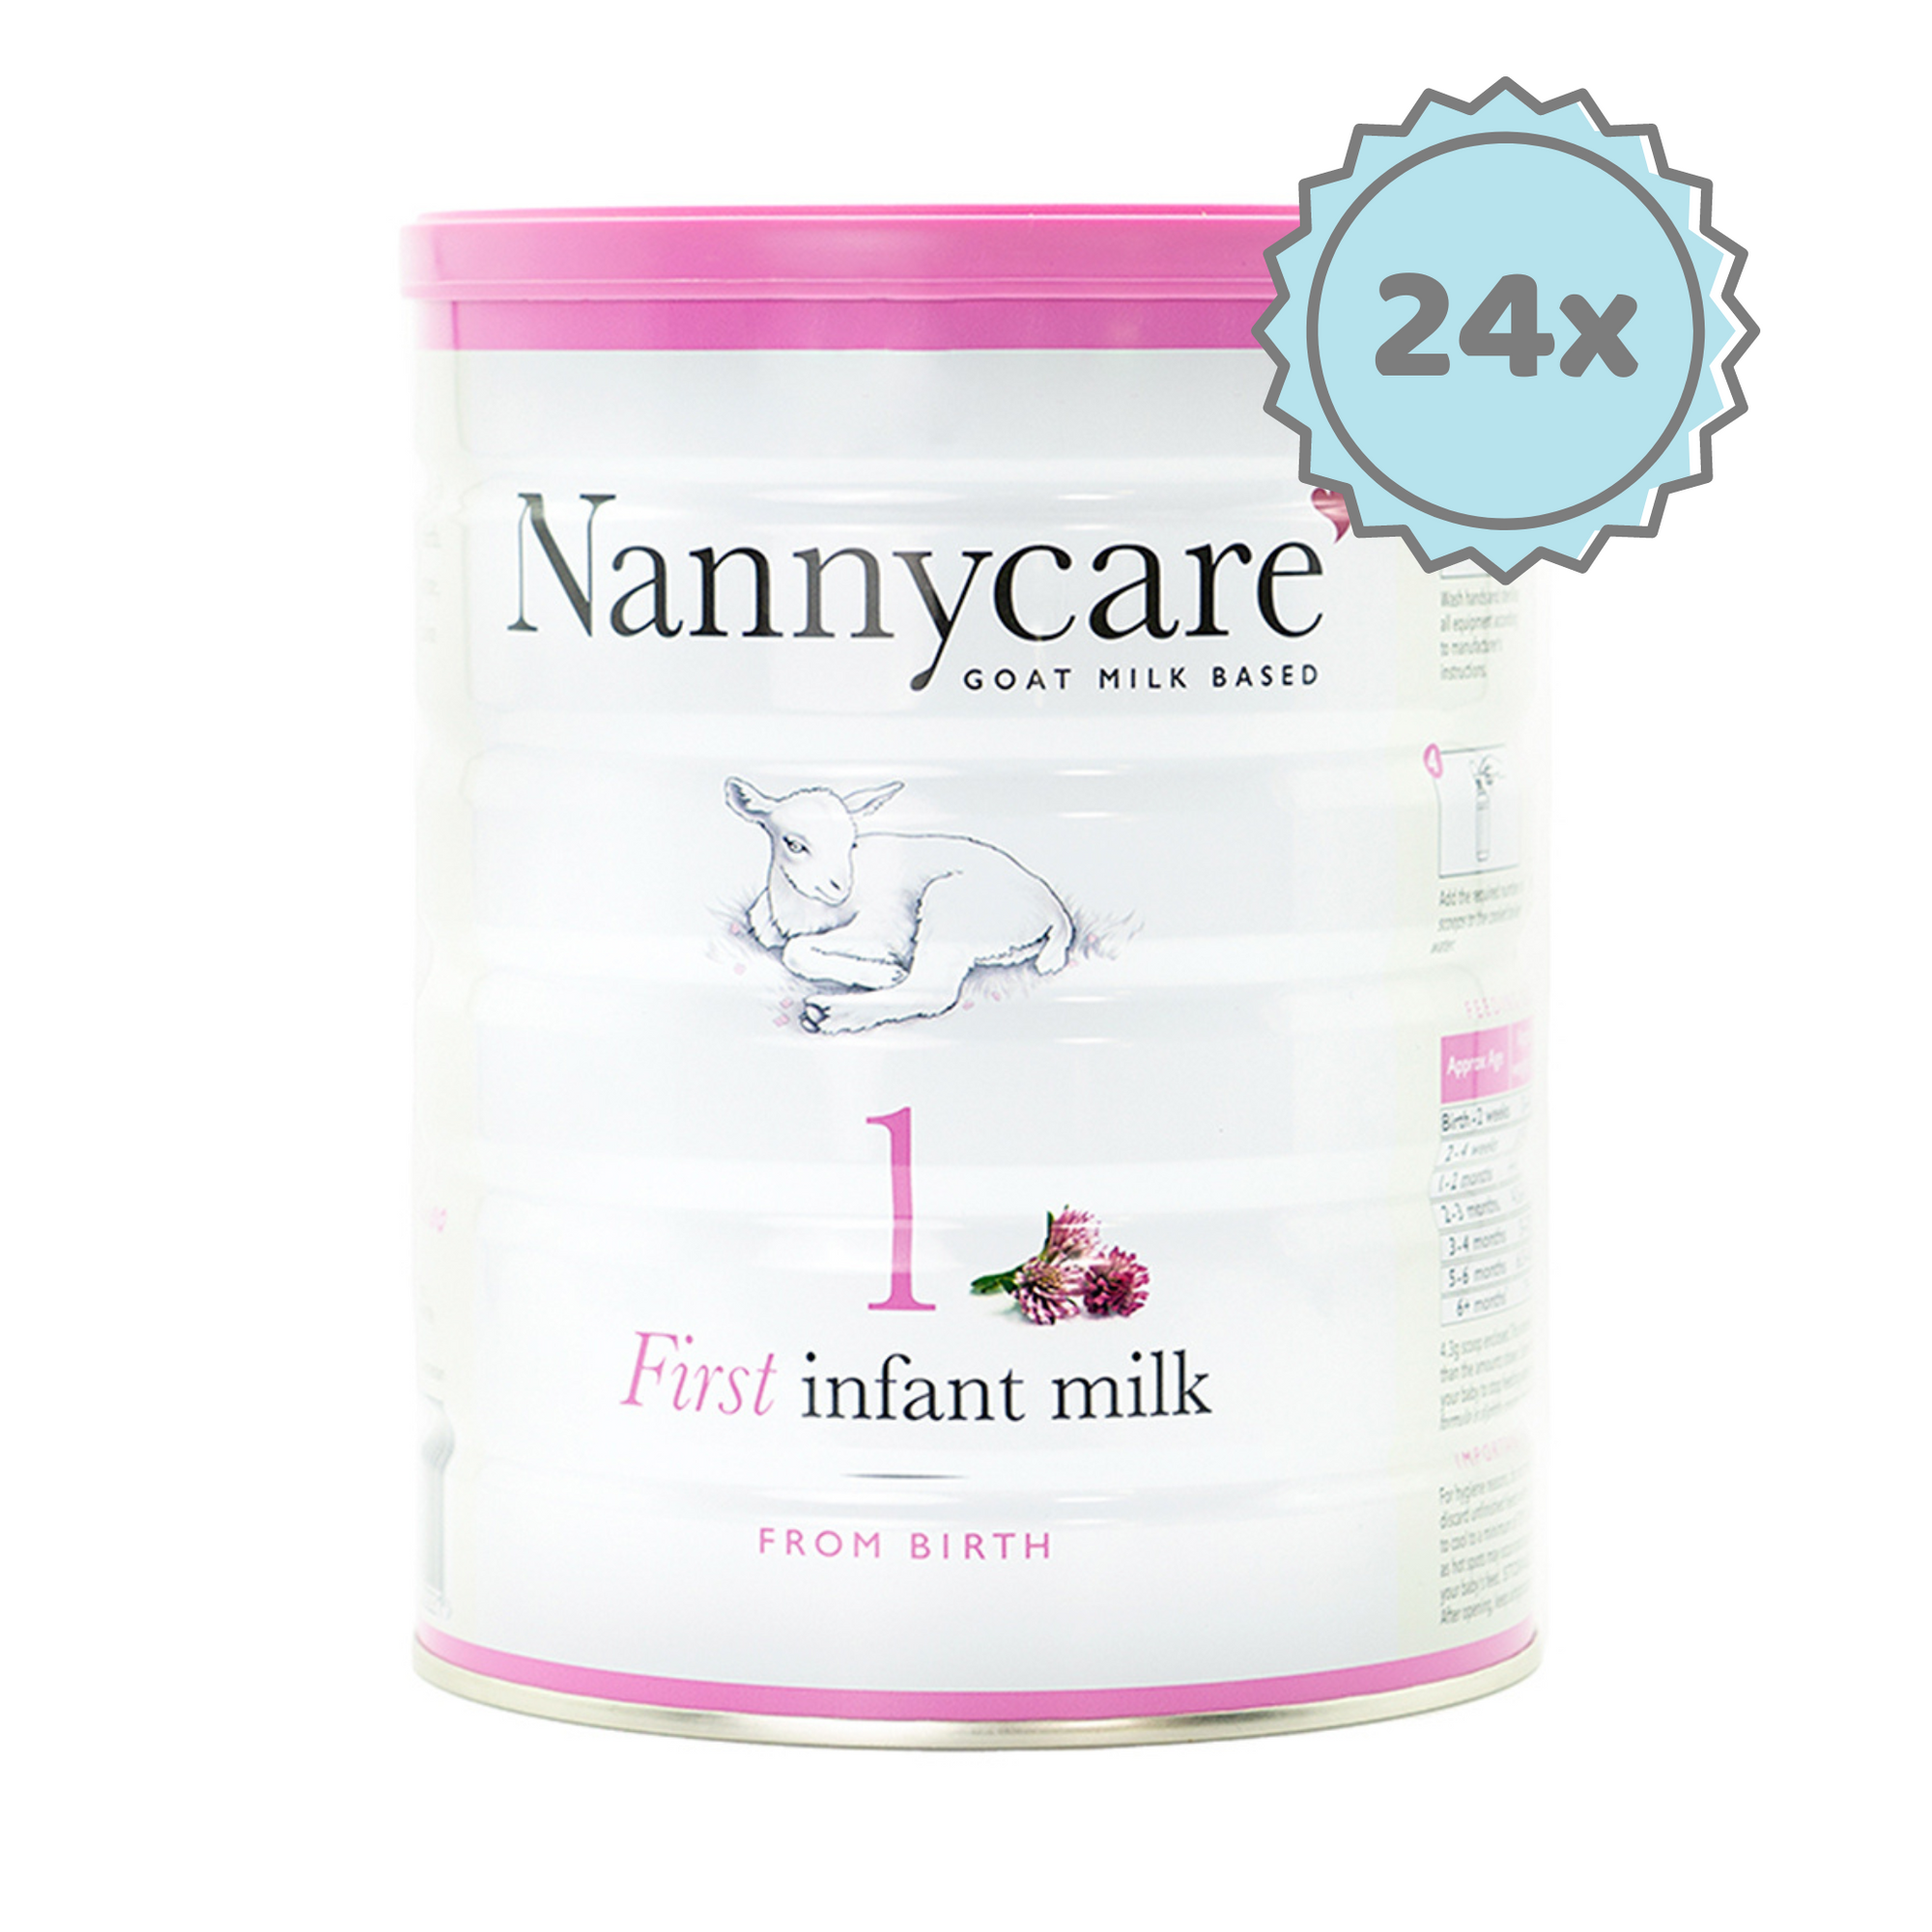 Nannycare Stage 1 | Organic European Baby Formula - 24 cans